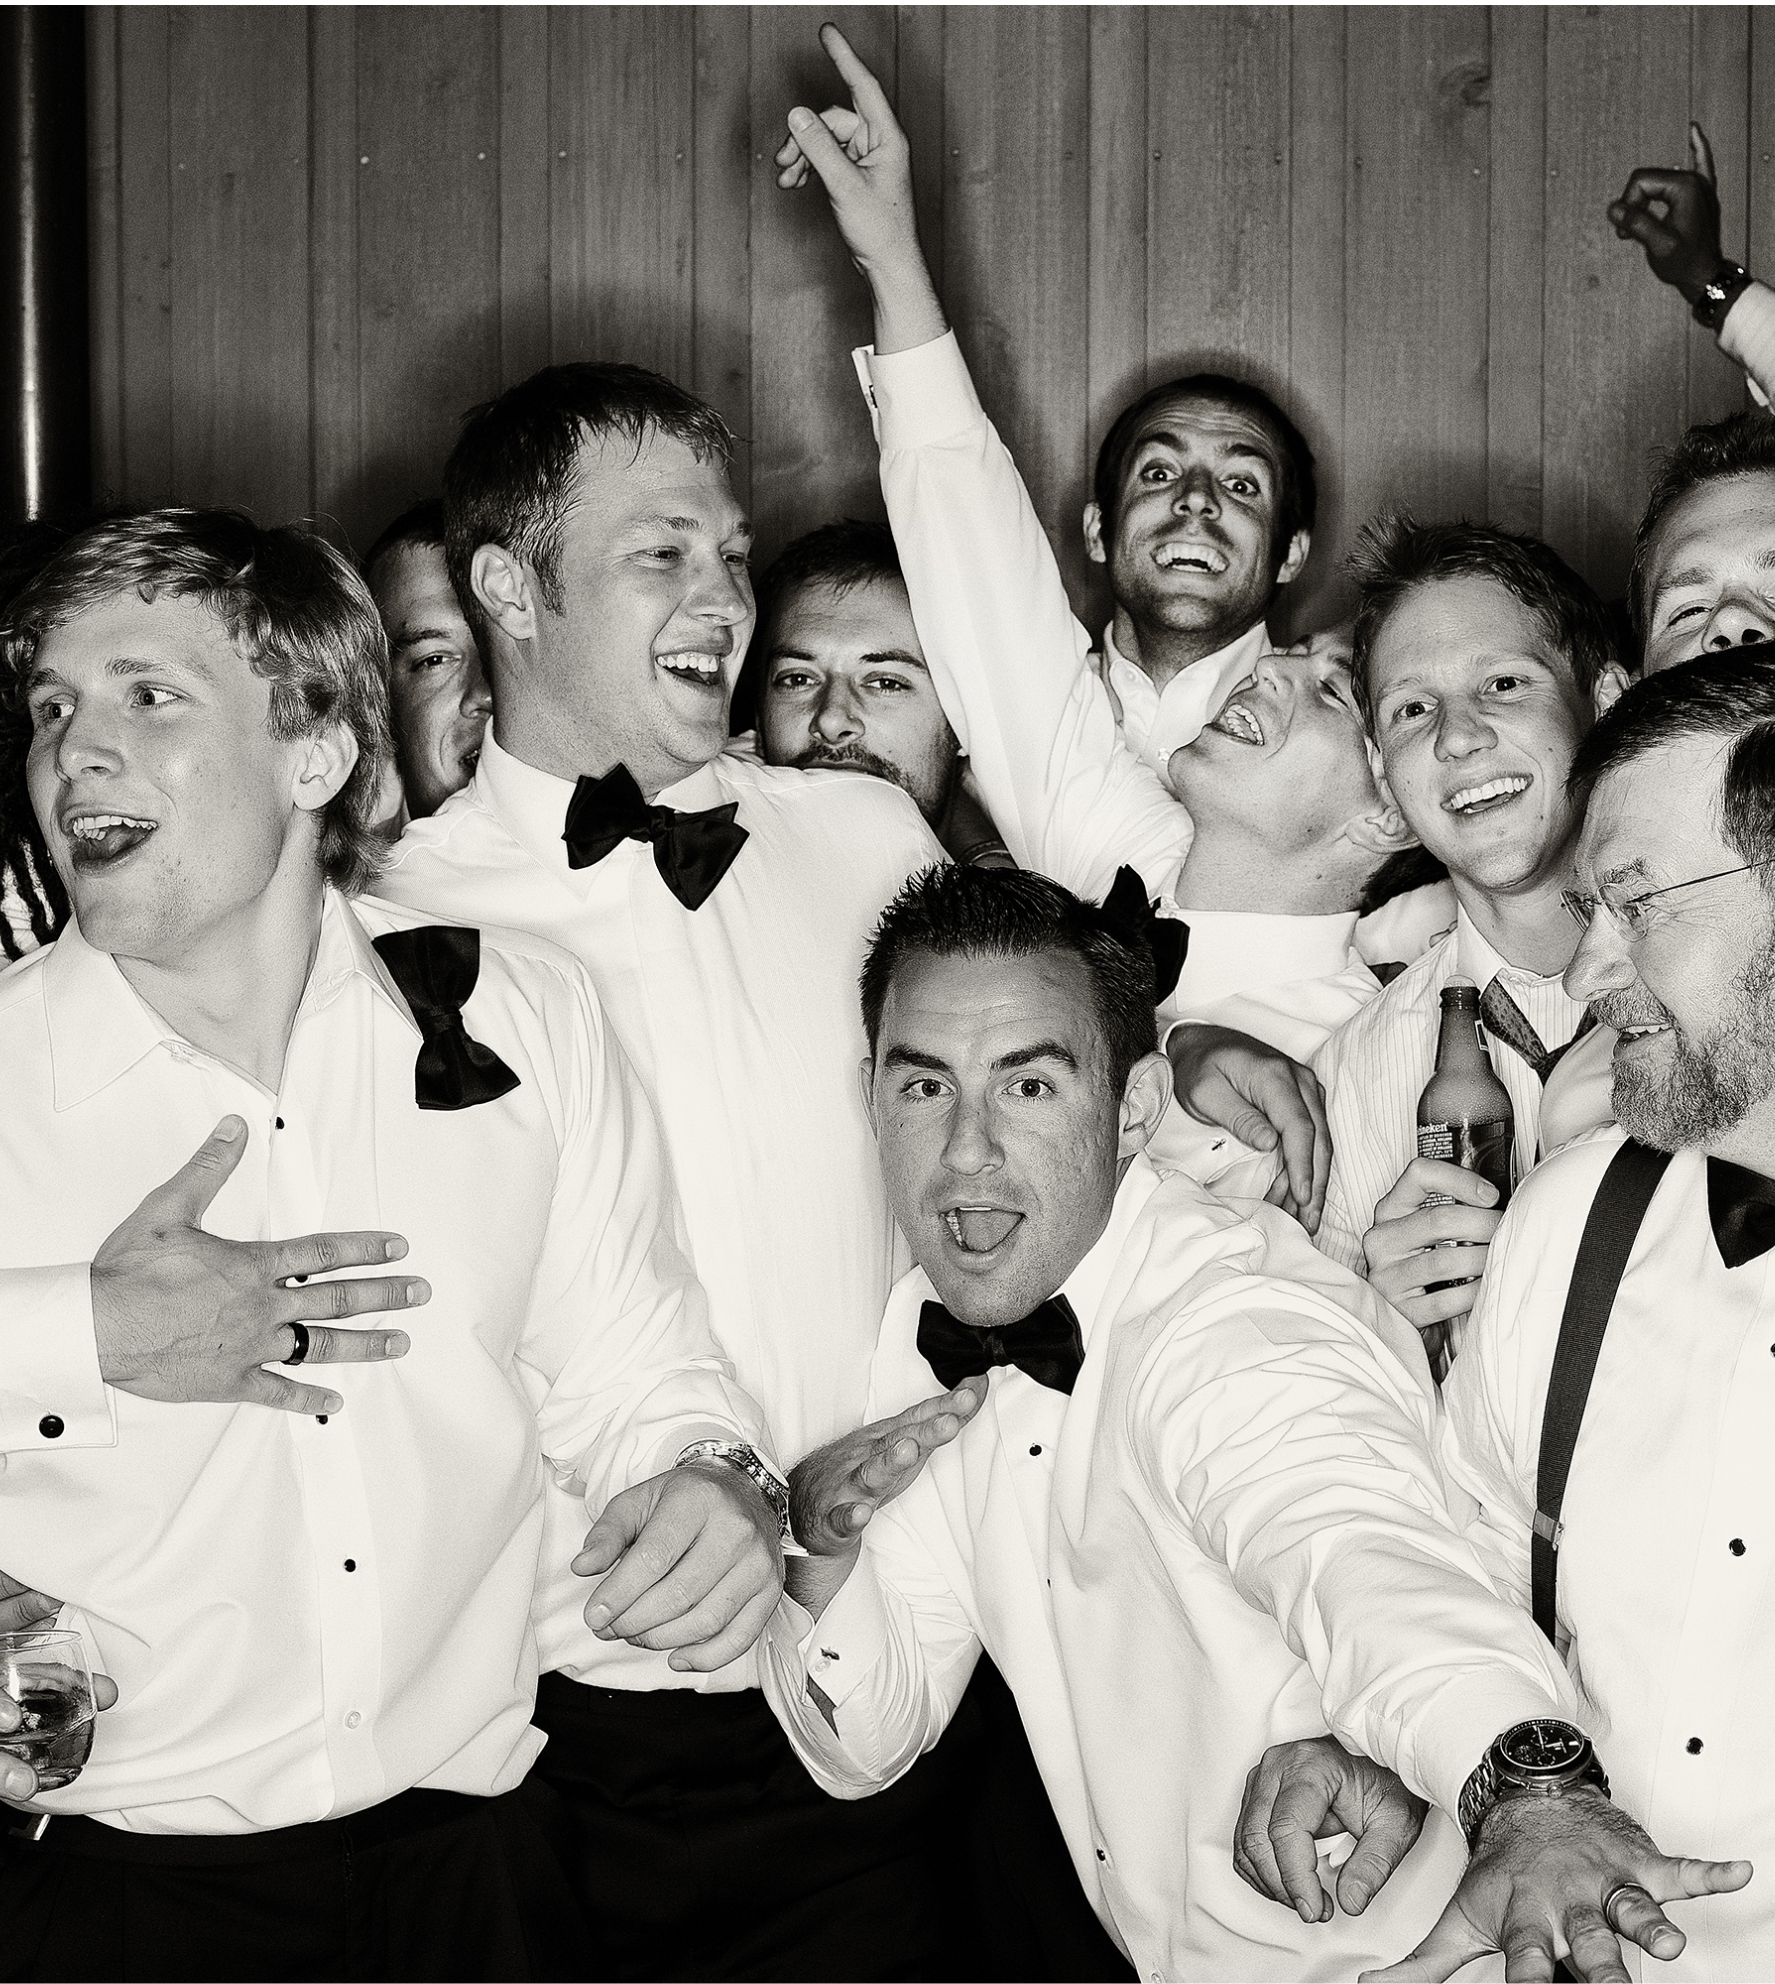 Men enjoying themselves at a bachelor party